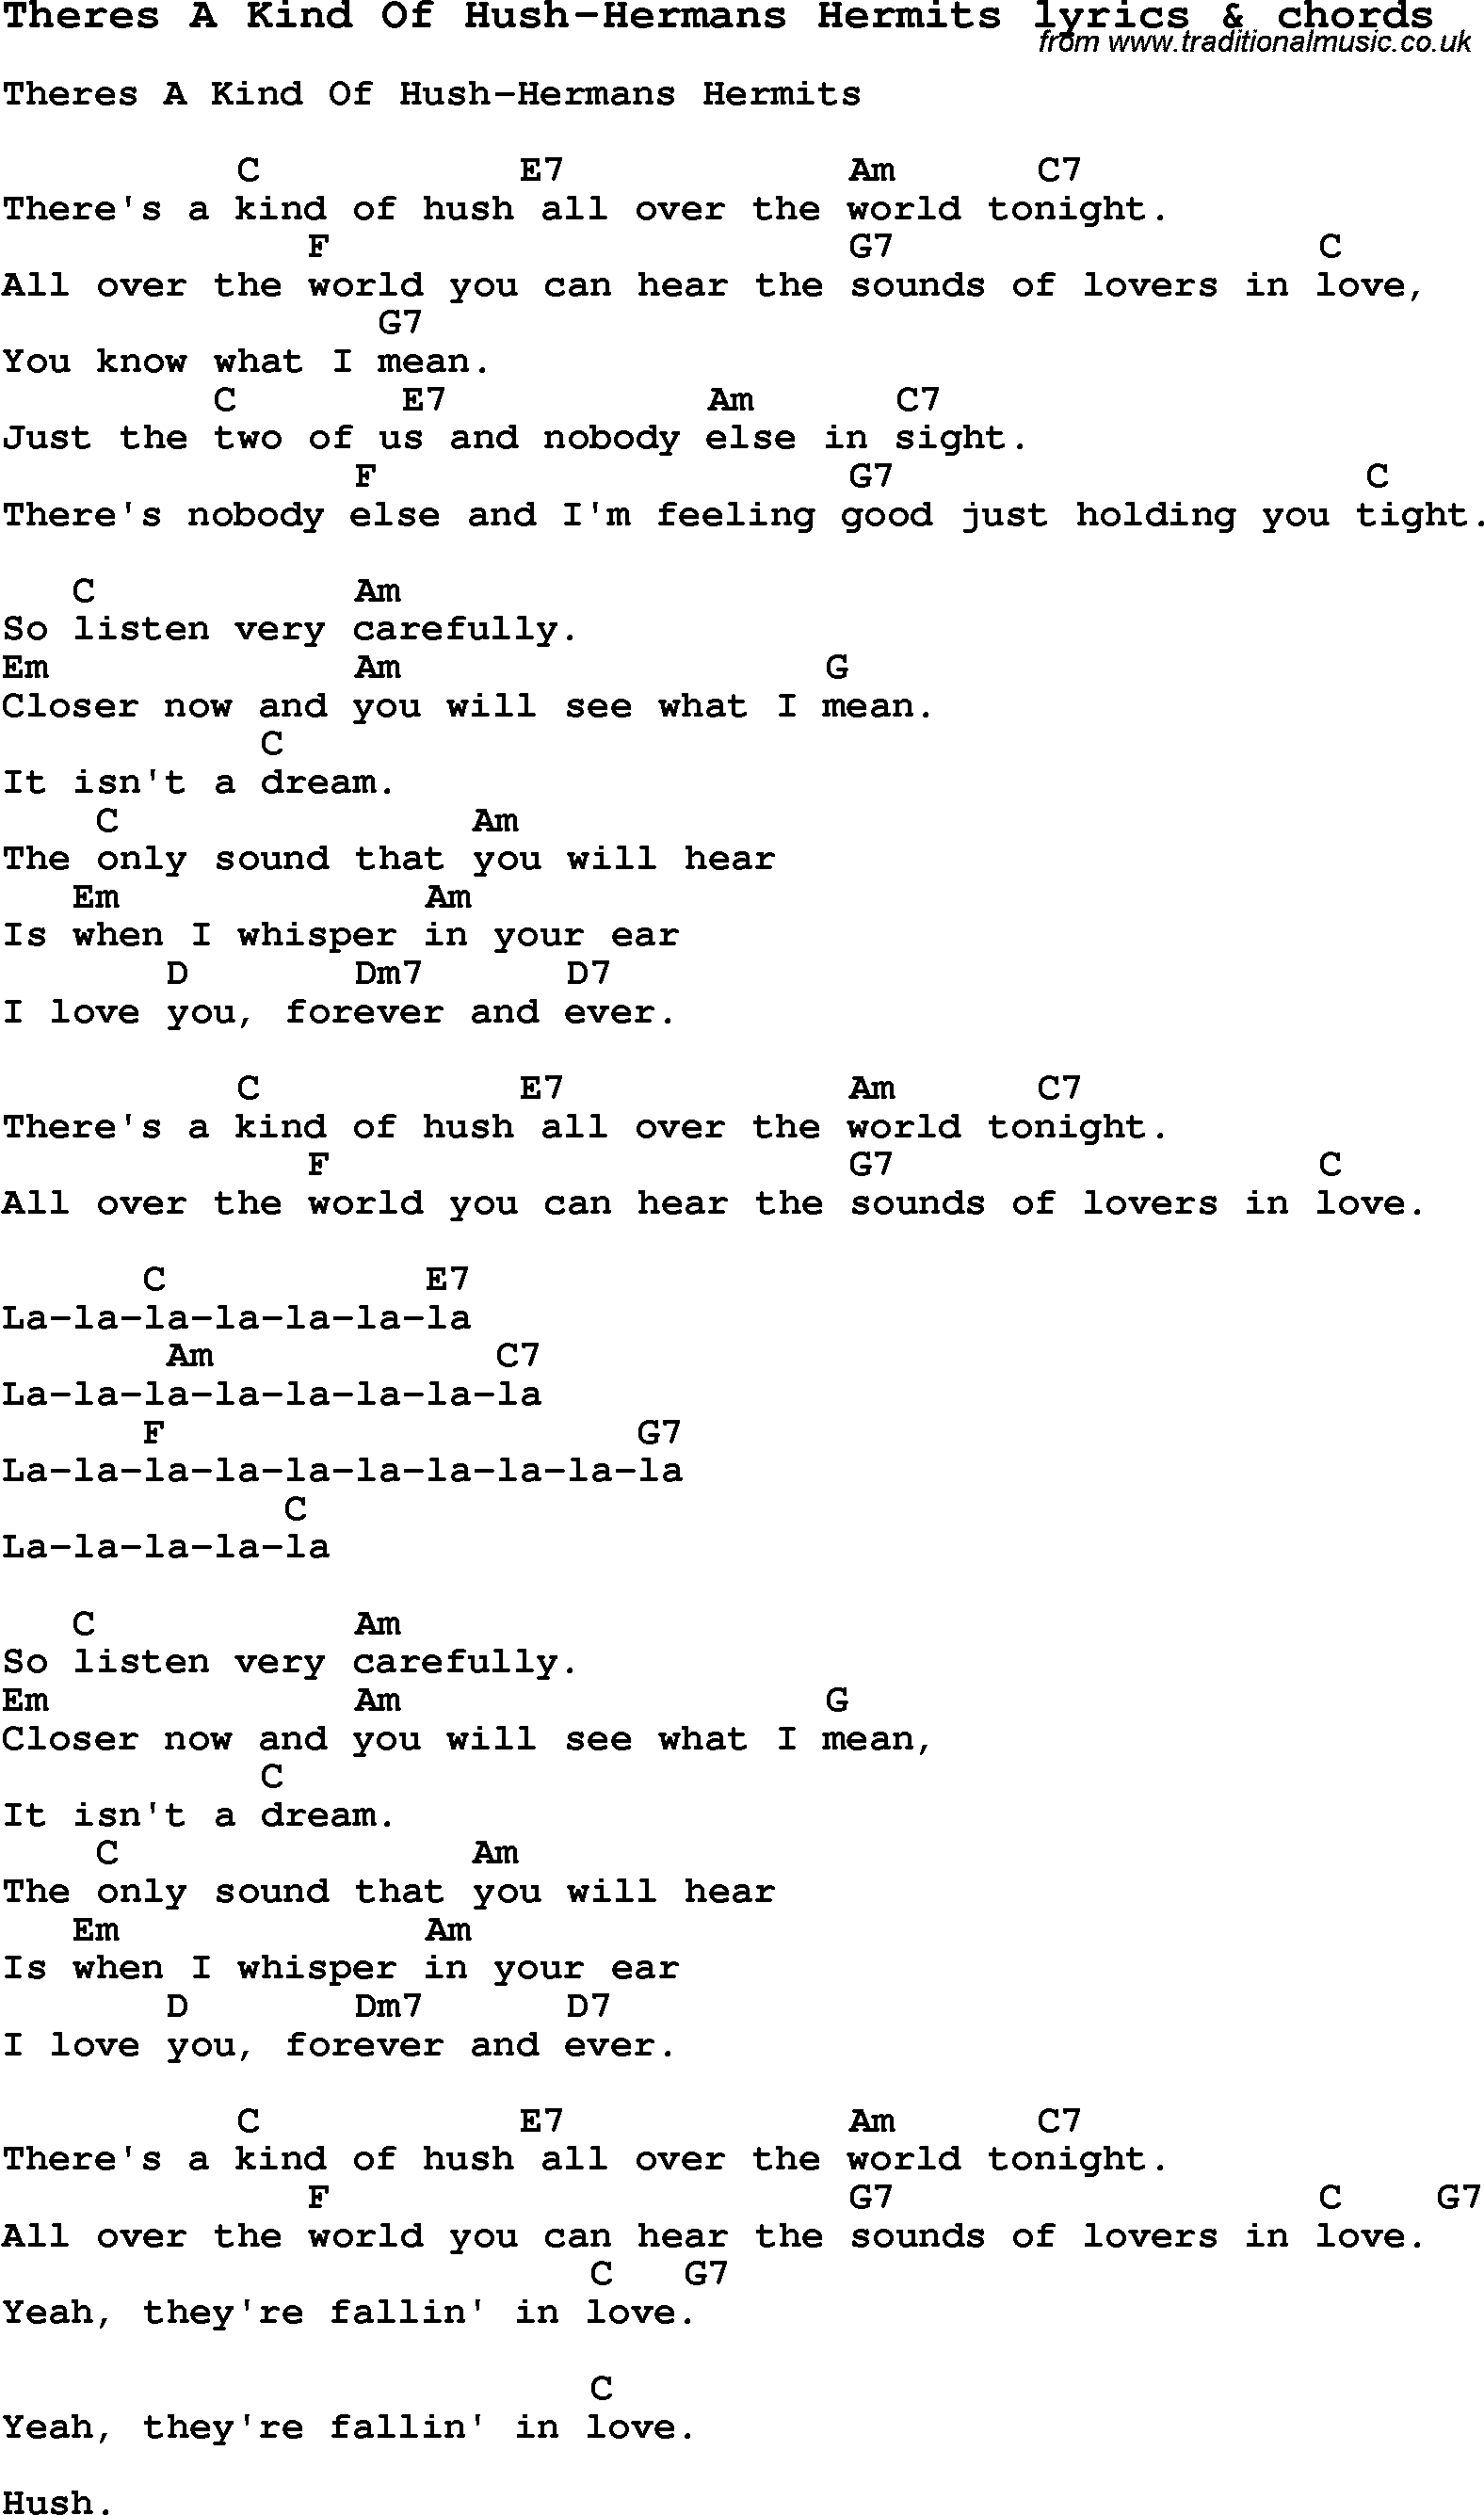 Love Song Lyrics for: Theres A Kind Of Hush-Hermans Hermits with chords for Ukulele, Guitar Banjo etc.